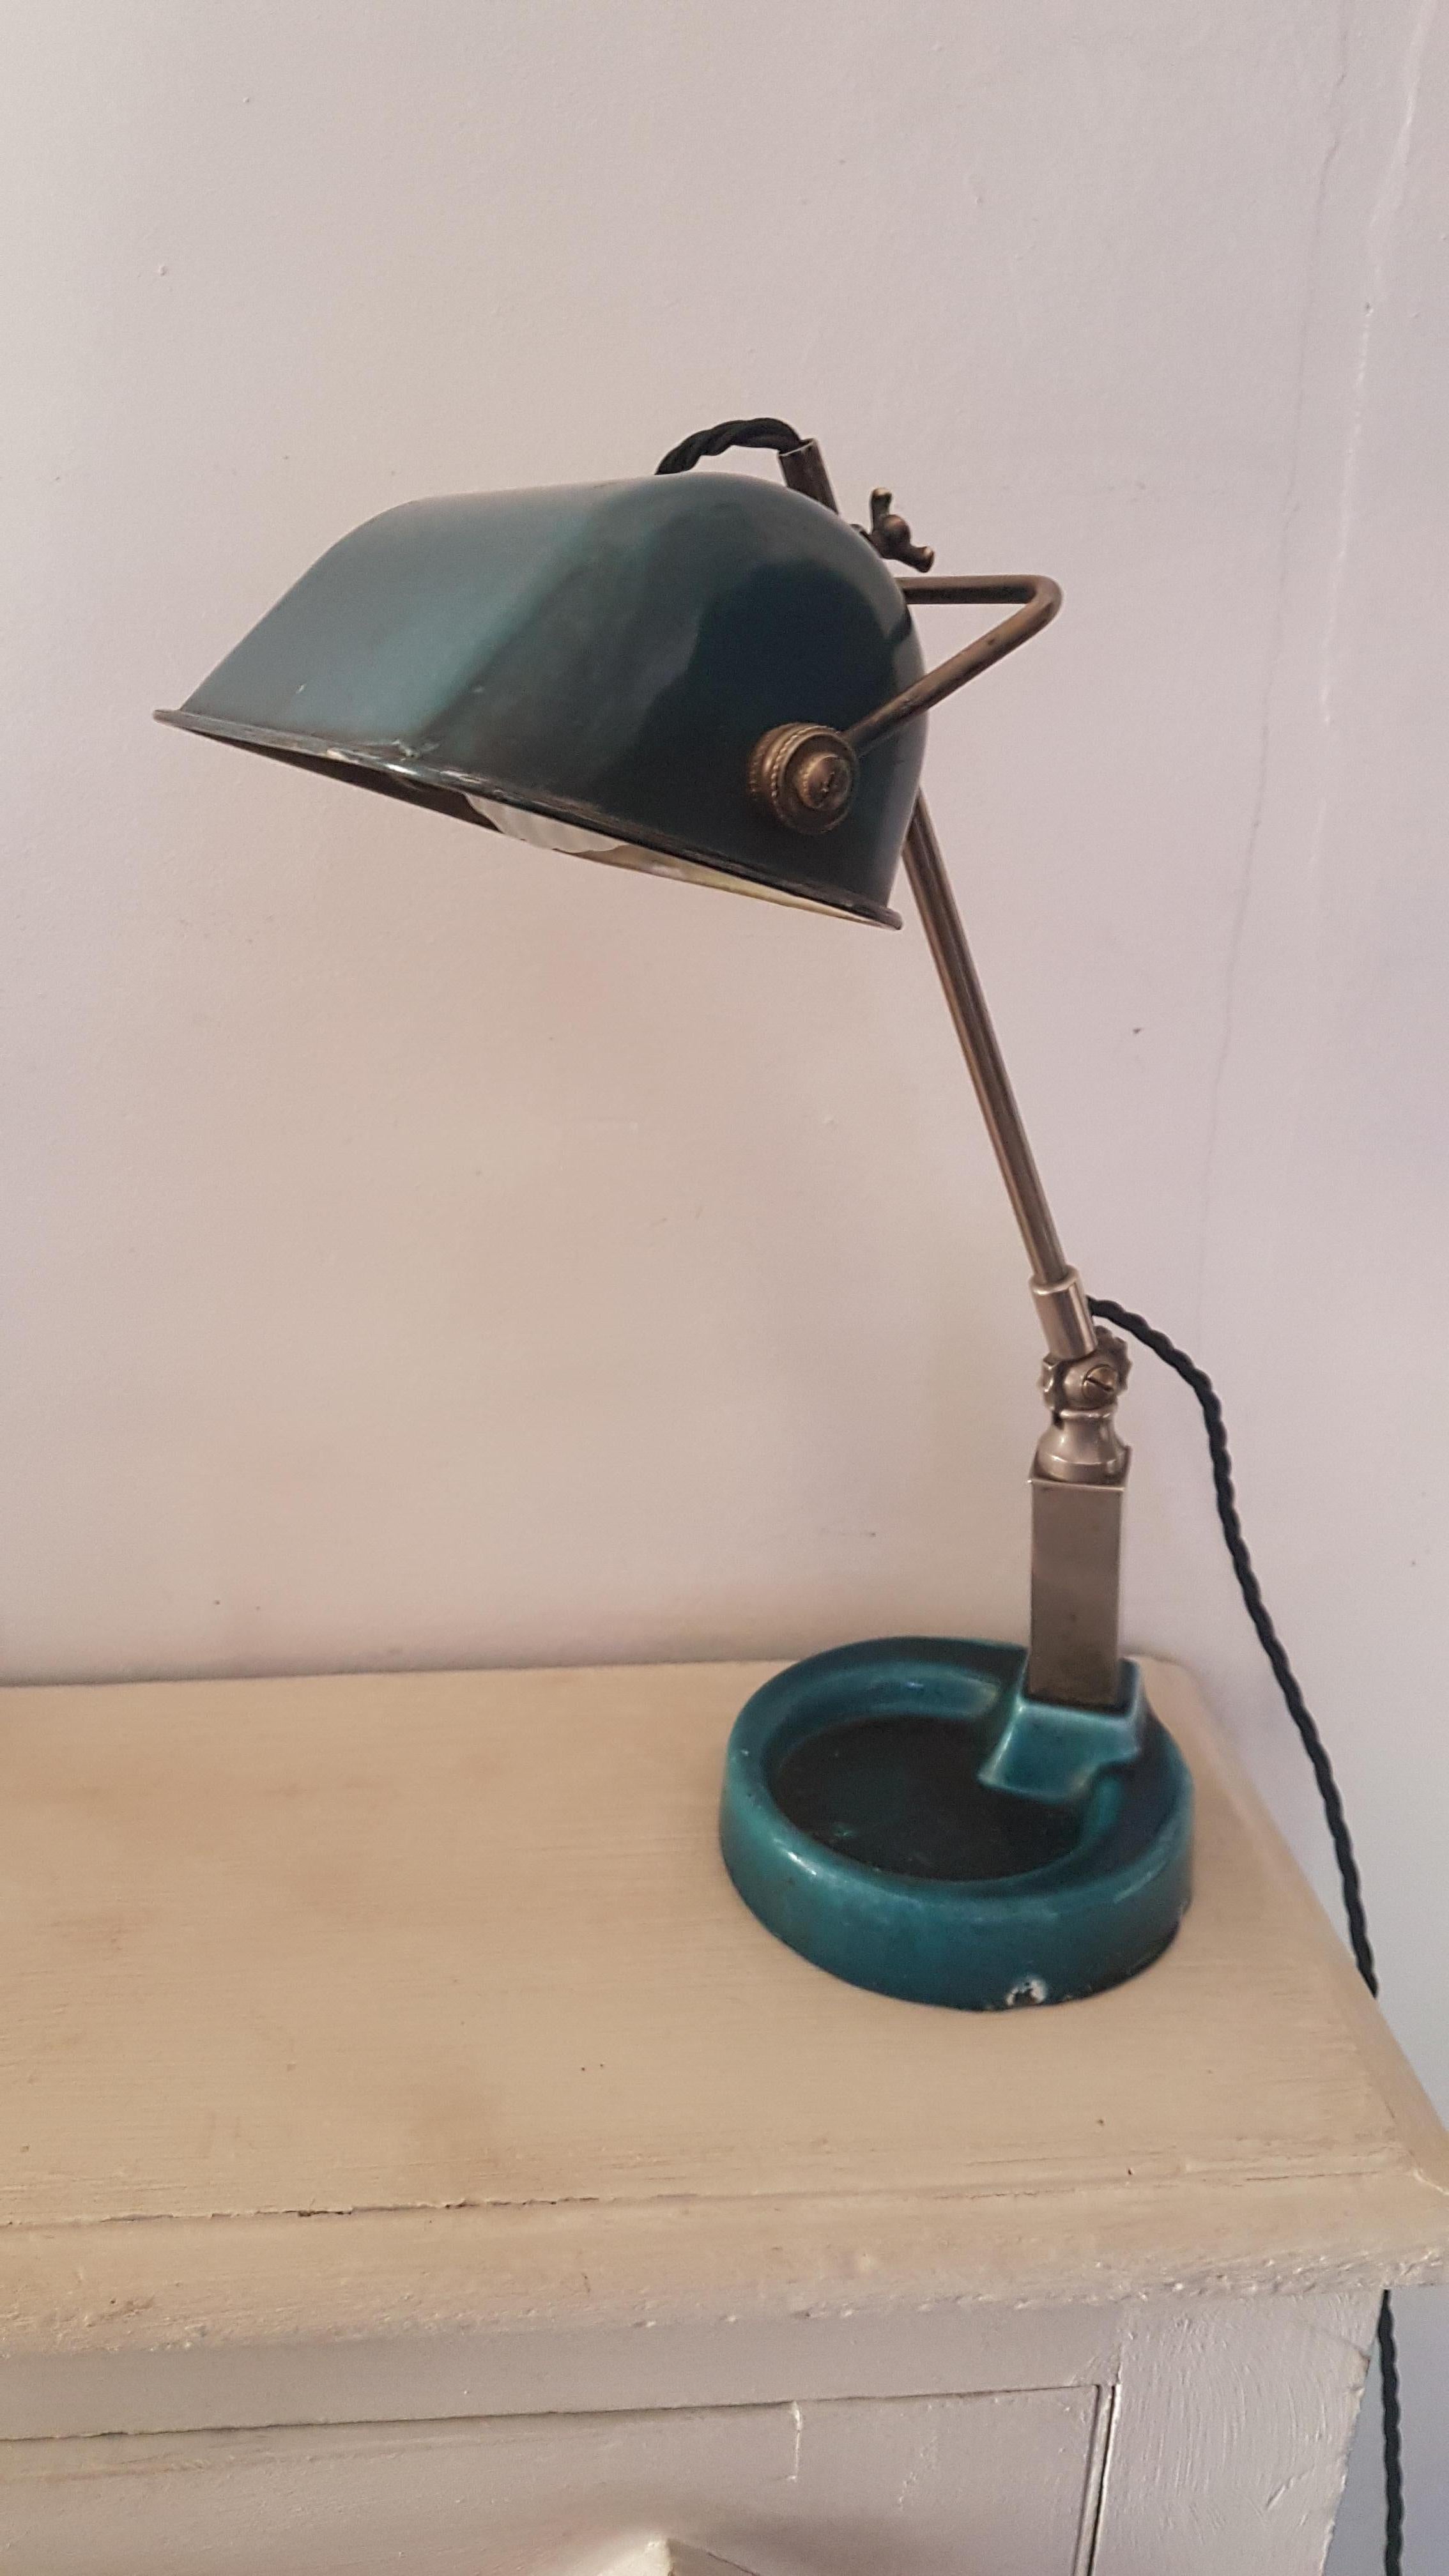 A beautiful blue enameled bankers lamp, the base is enameled on cast iron whilst the shade is on metal. The shade is adjustable in height using the nut, the angle is adjustable as well. The column is chromed and in good condition. Has been fully